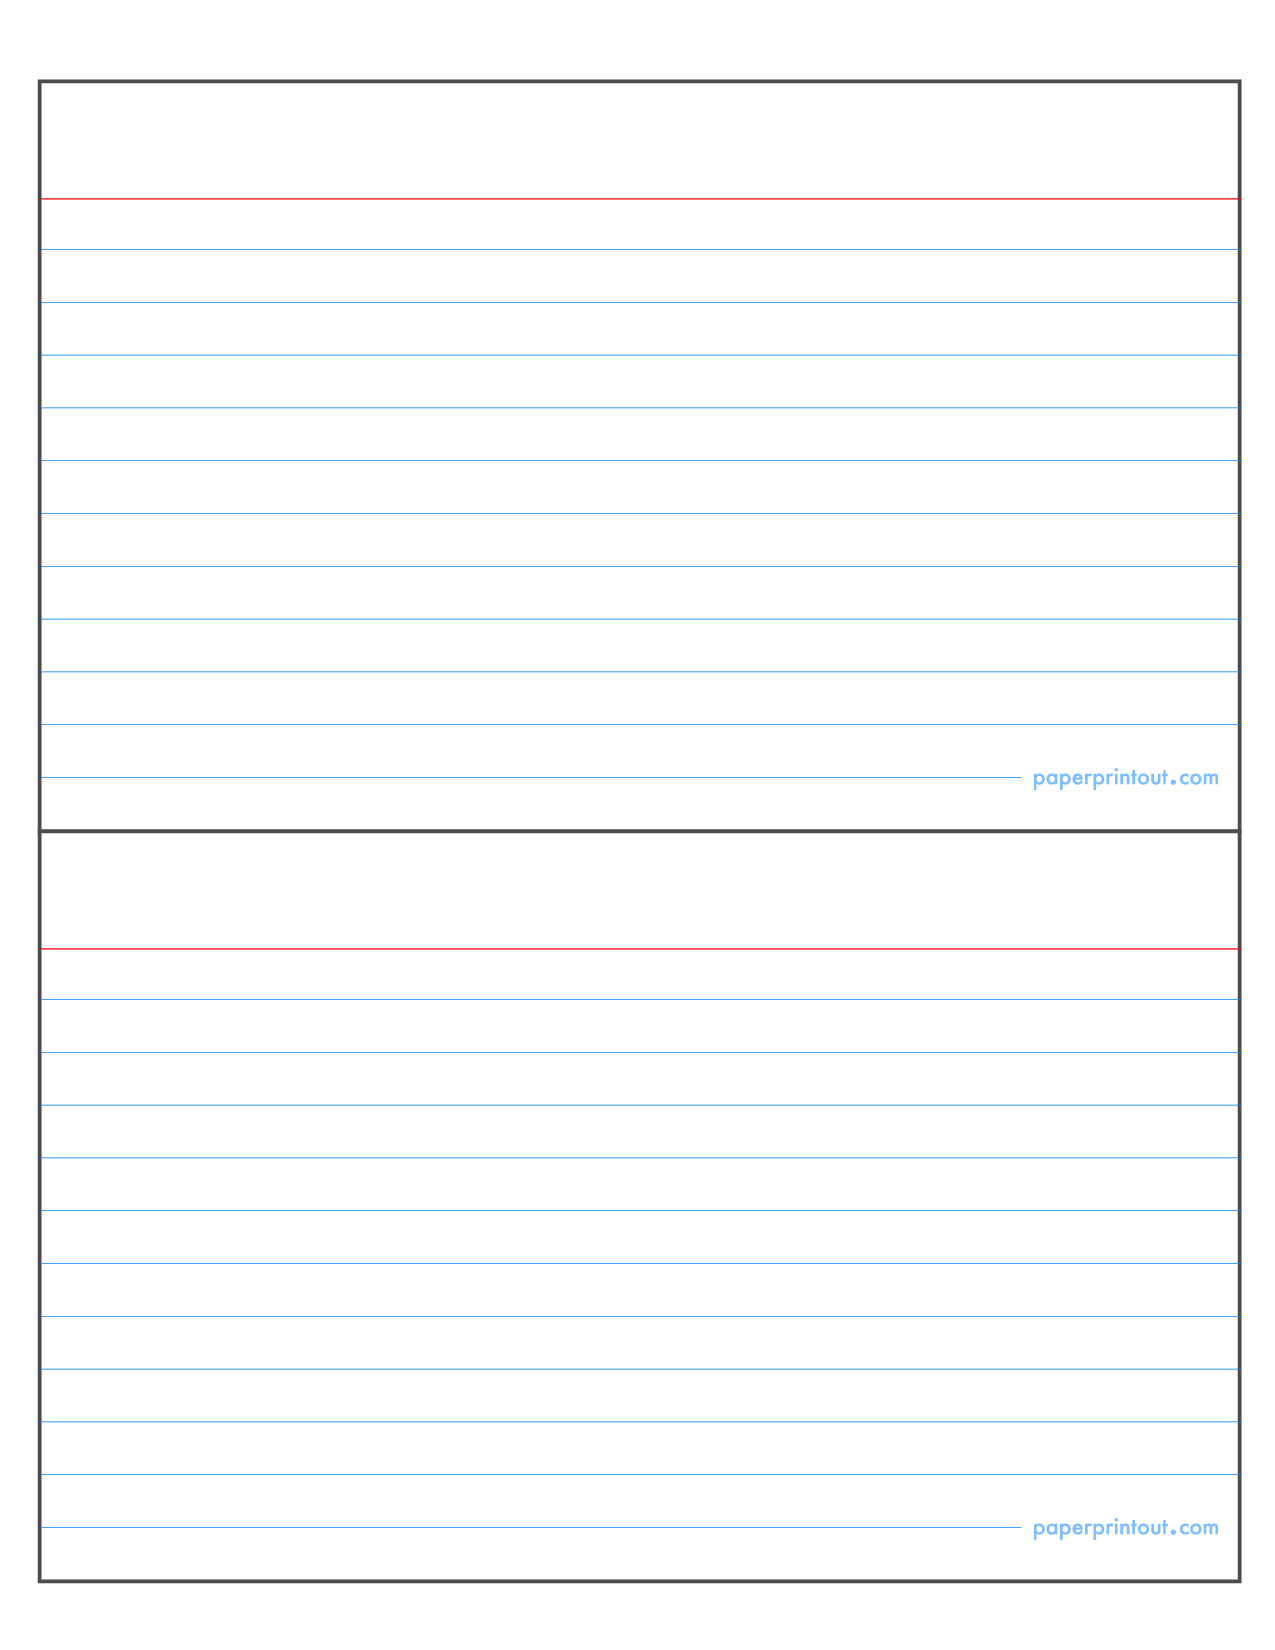 Printable 5x8 Index Card Template